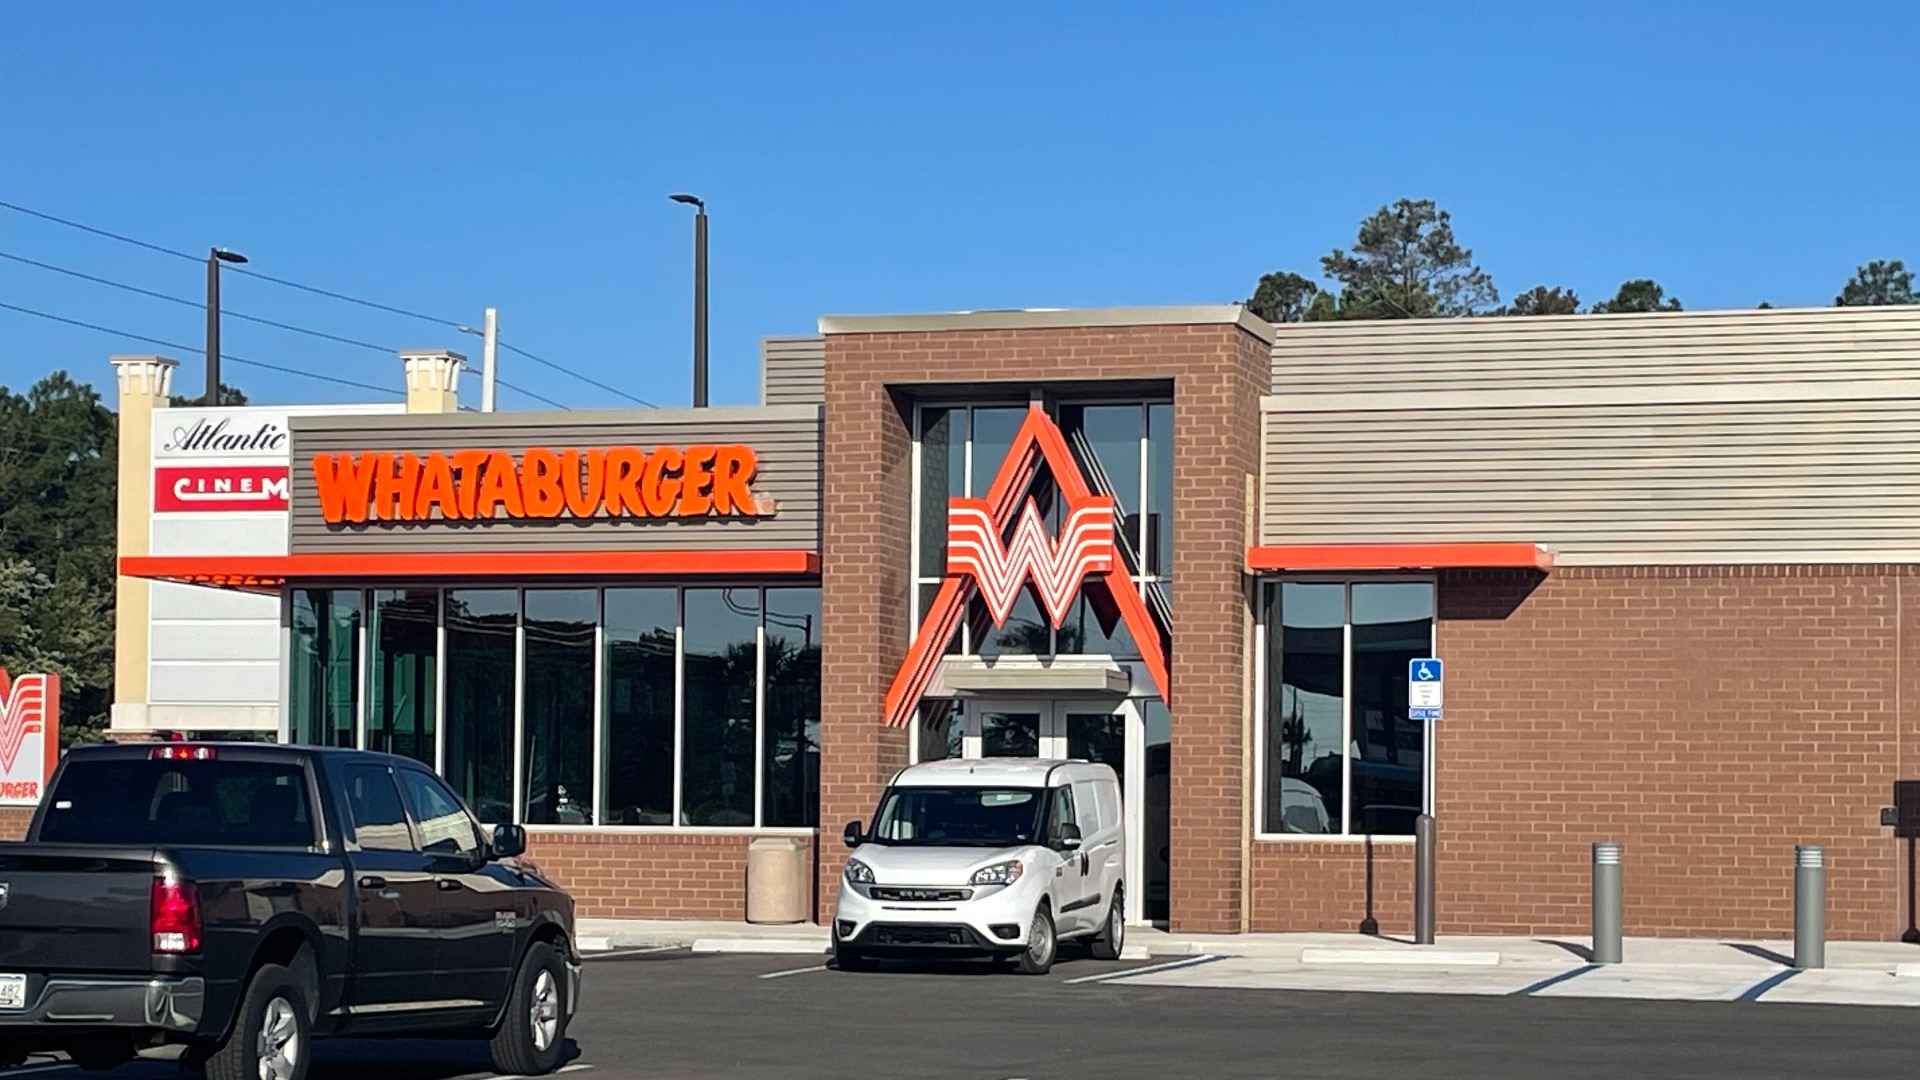 Whataburger completed construction several months ago on a new Jacksonville restaurant in the Atlantic North shopping center, but it has opened.